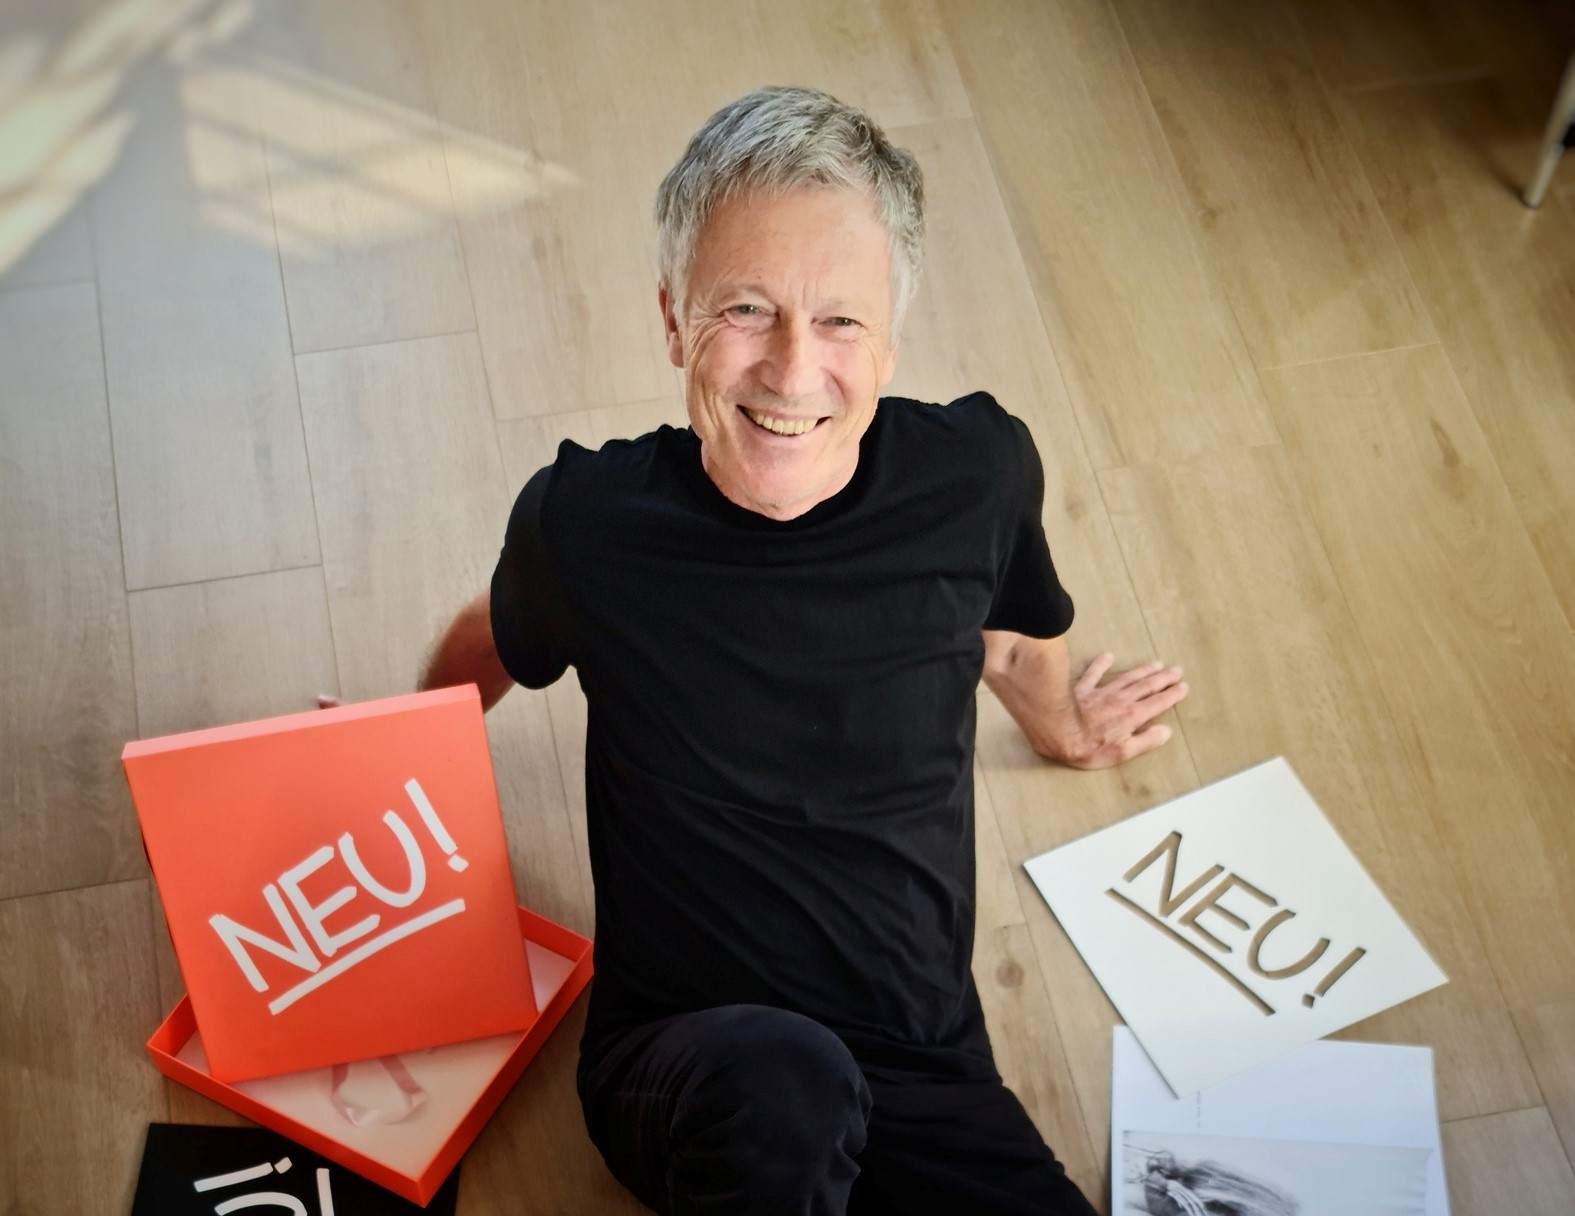 Michael Rother Plays NEU!, Harmonia & Solo Works + James Holden - フライヤー表